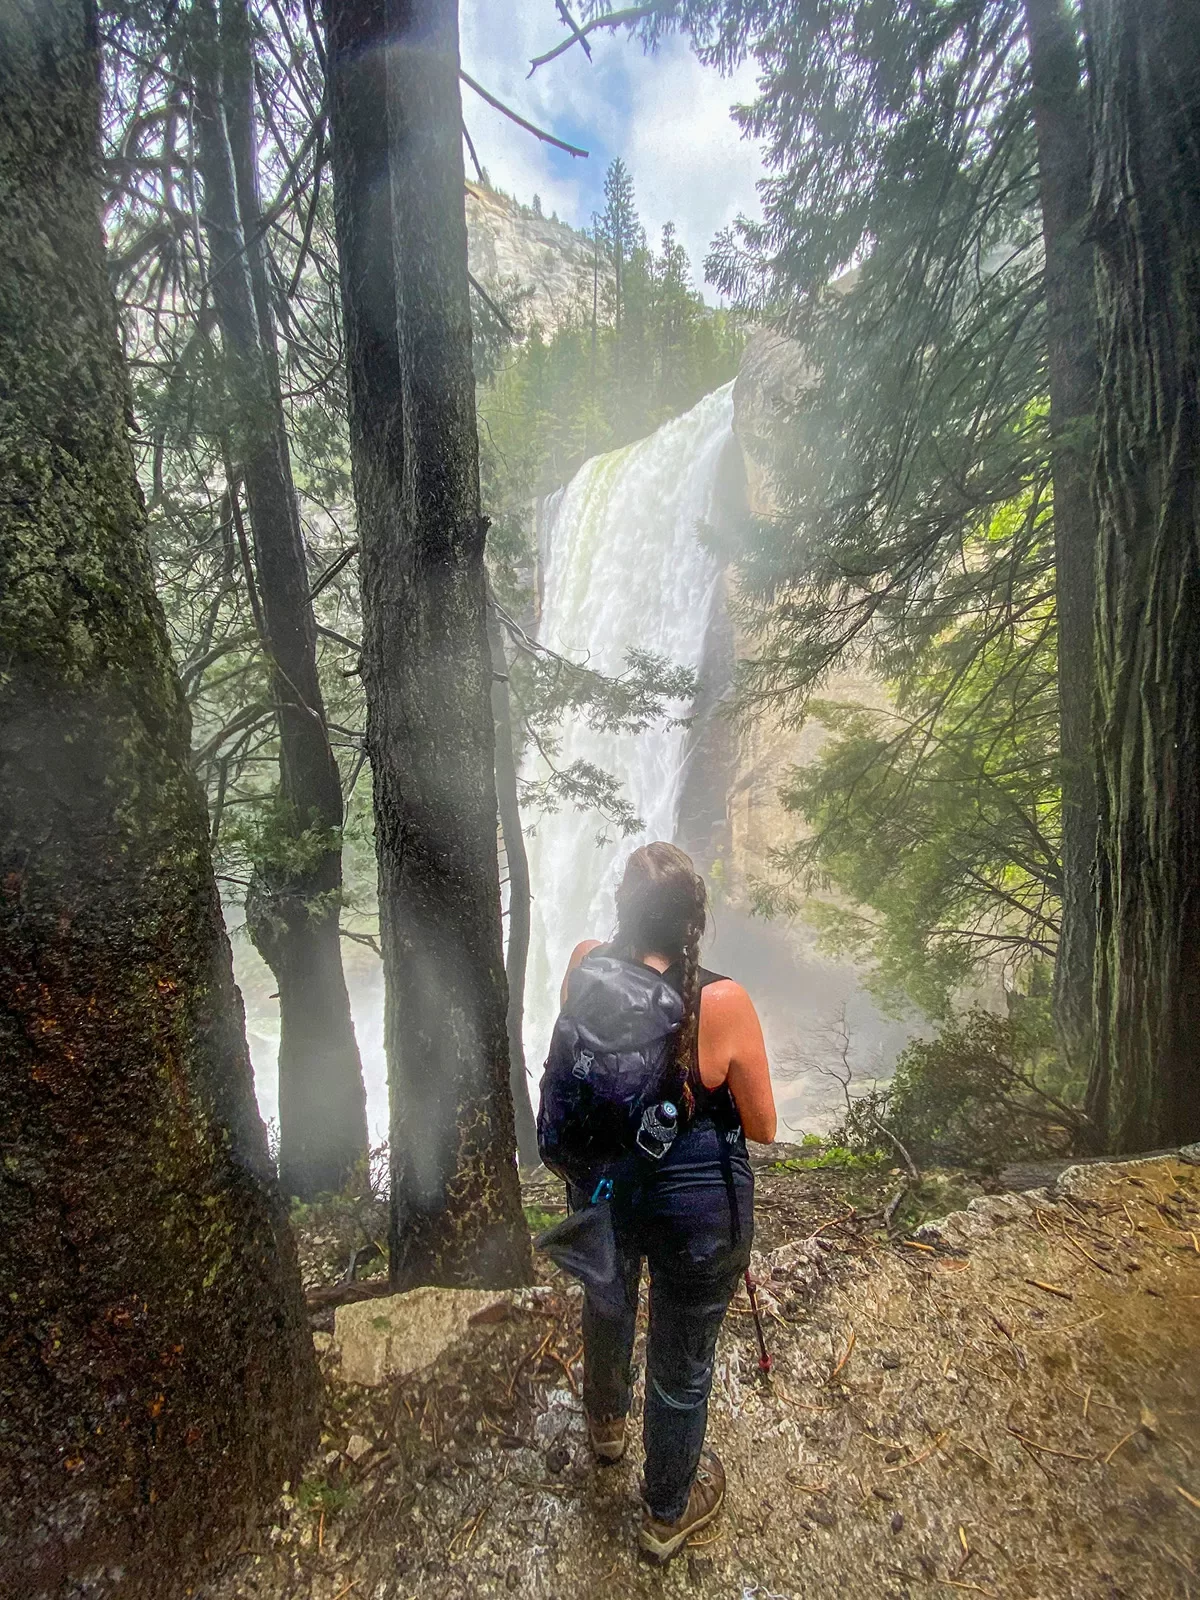 A hiker stops to admire a waterfall